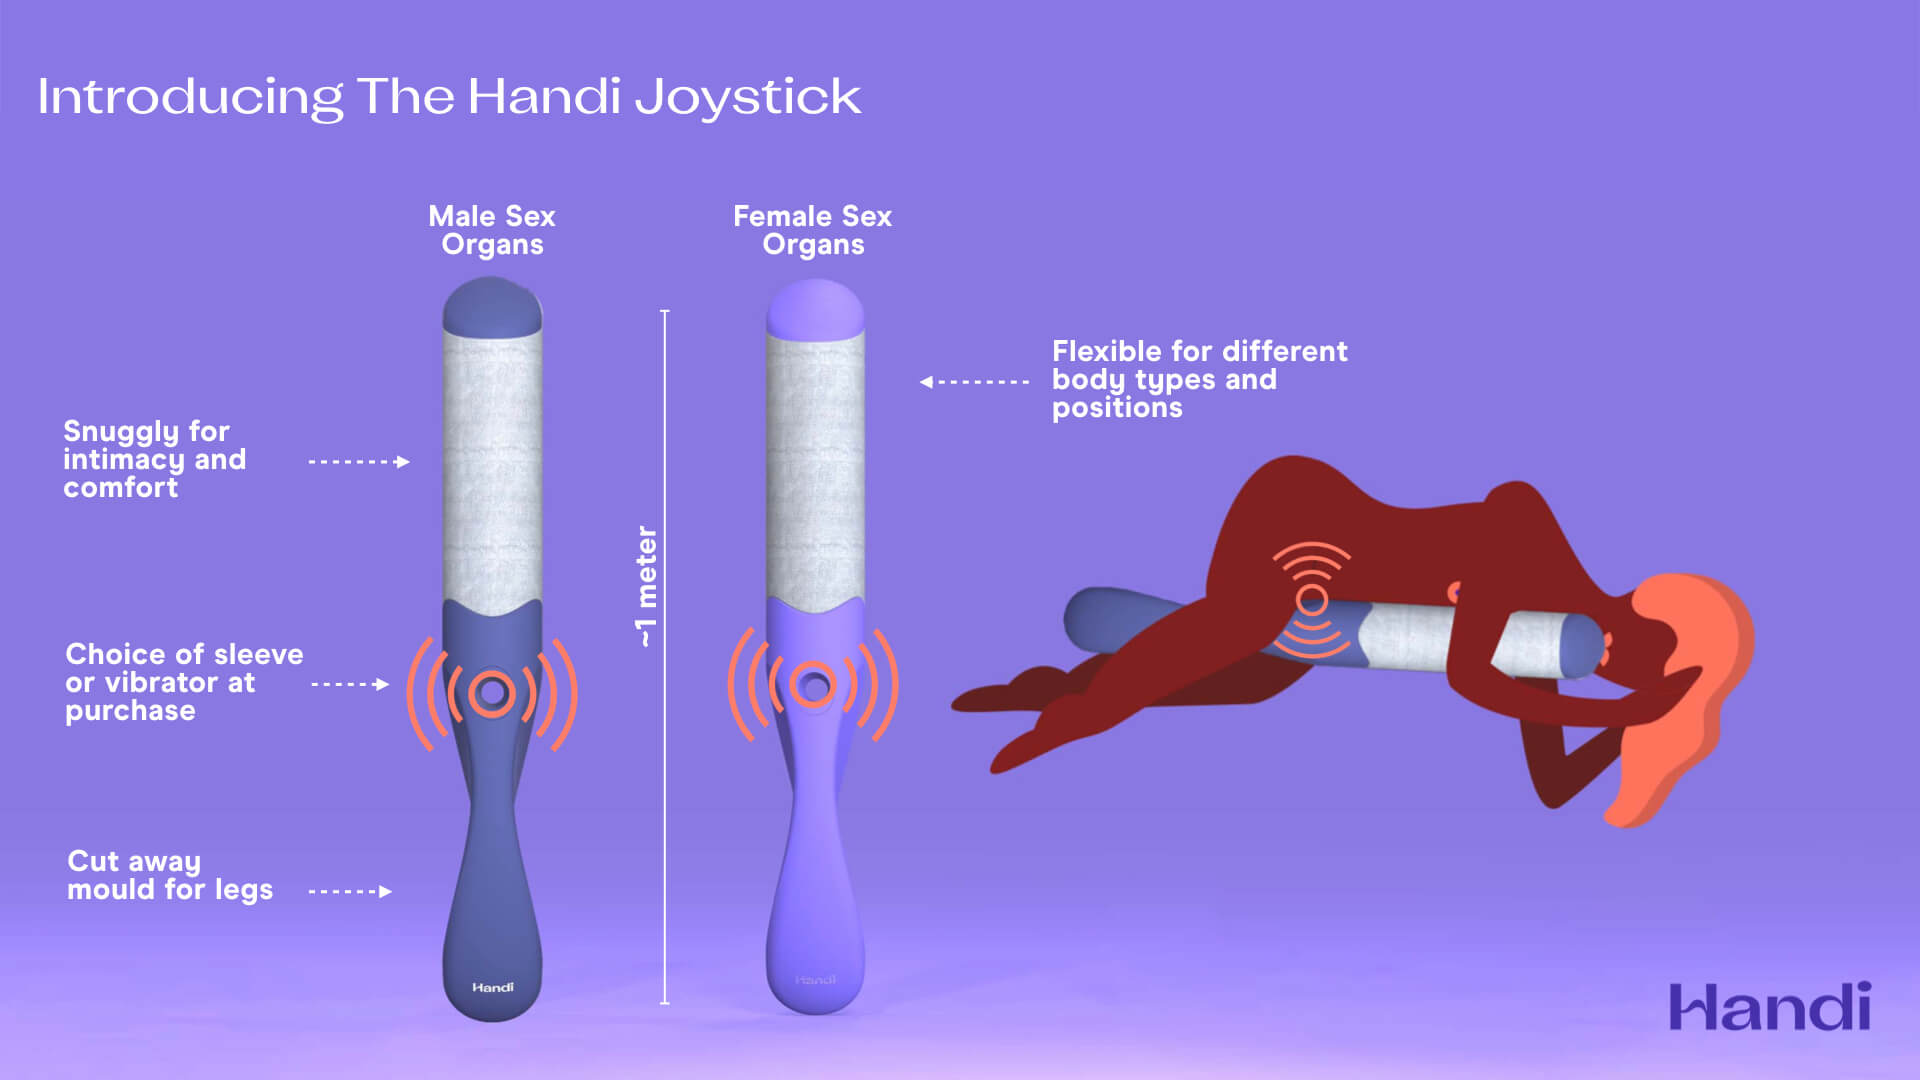 Handi Joystick sex toy for disabled people